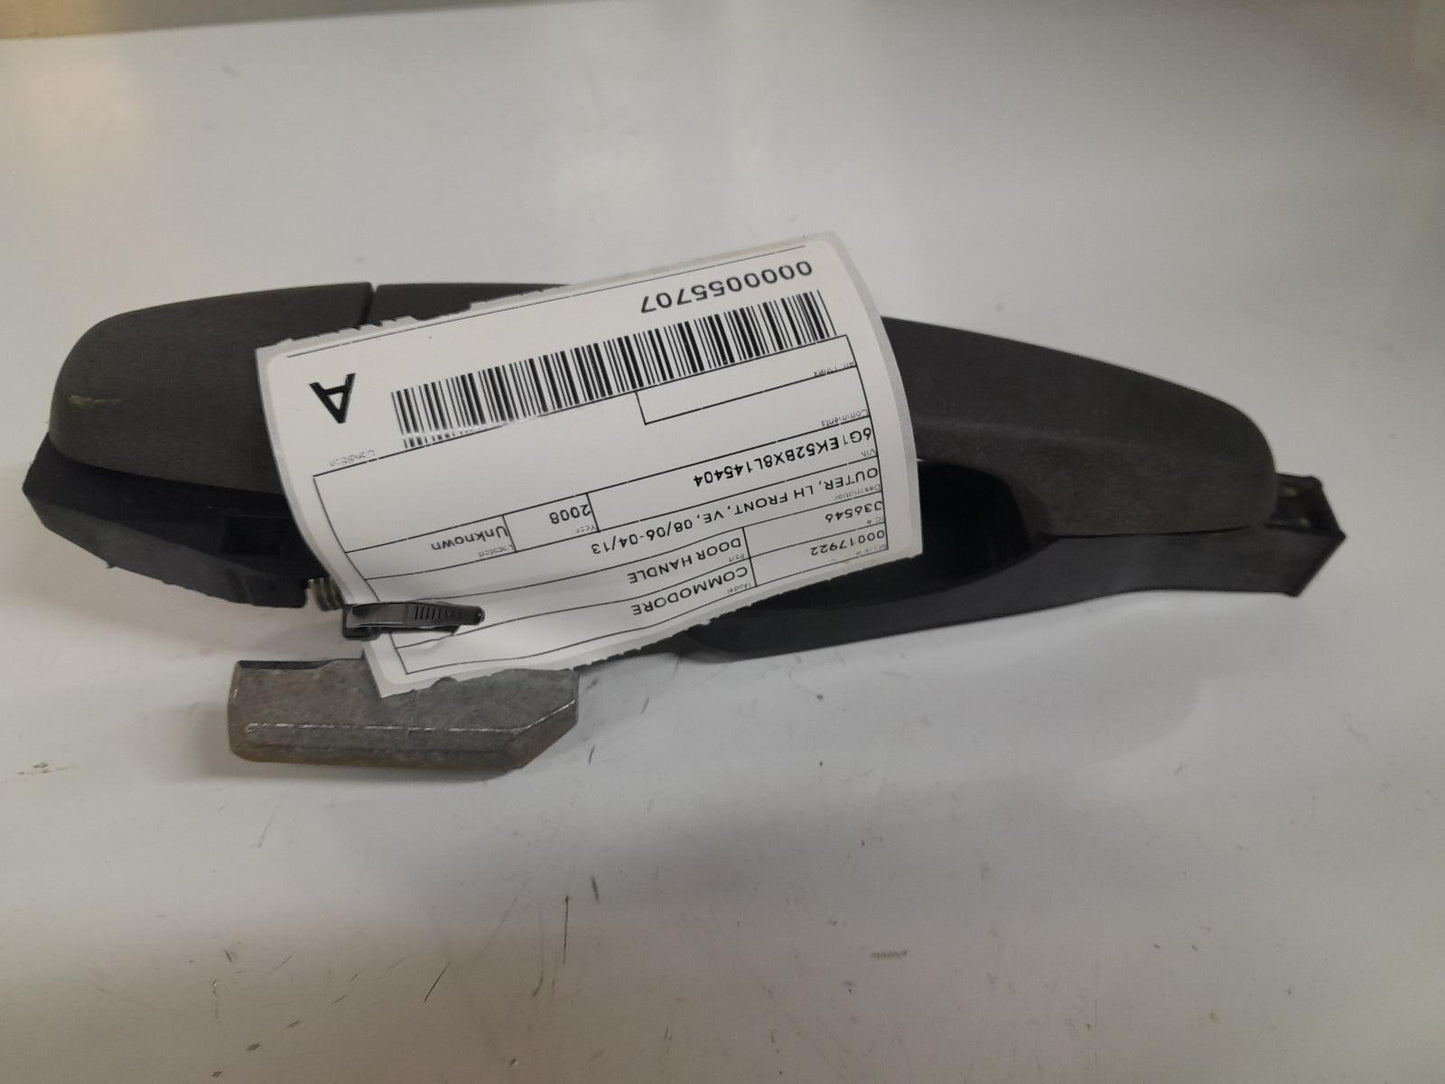 HOLDEN COMMODORE DOOR HANDLE OUTER, LH FRONT, VE, 08/06-04/13